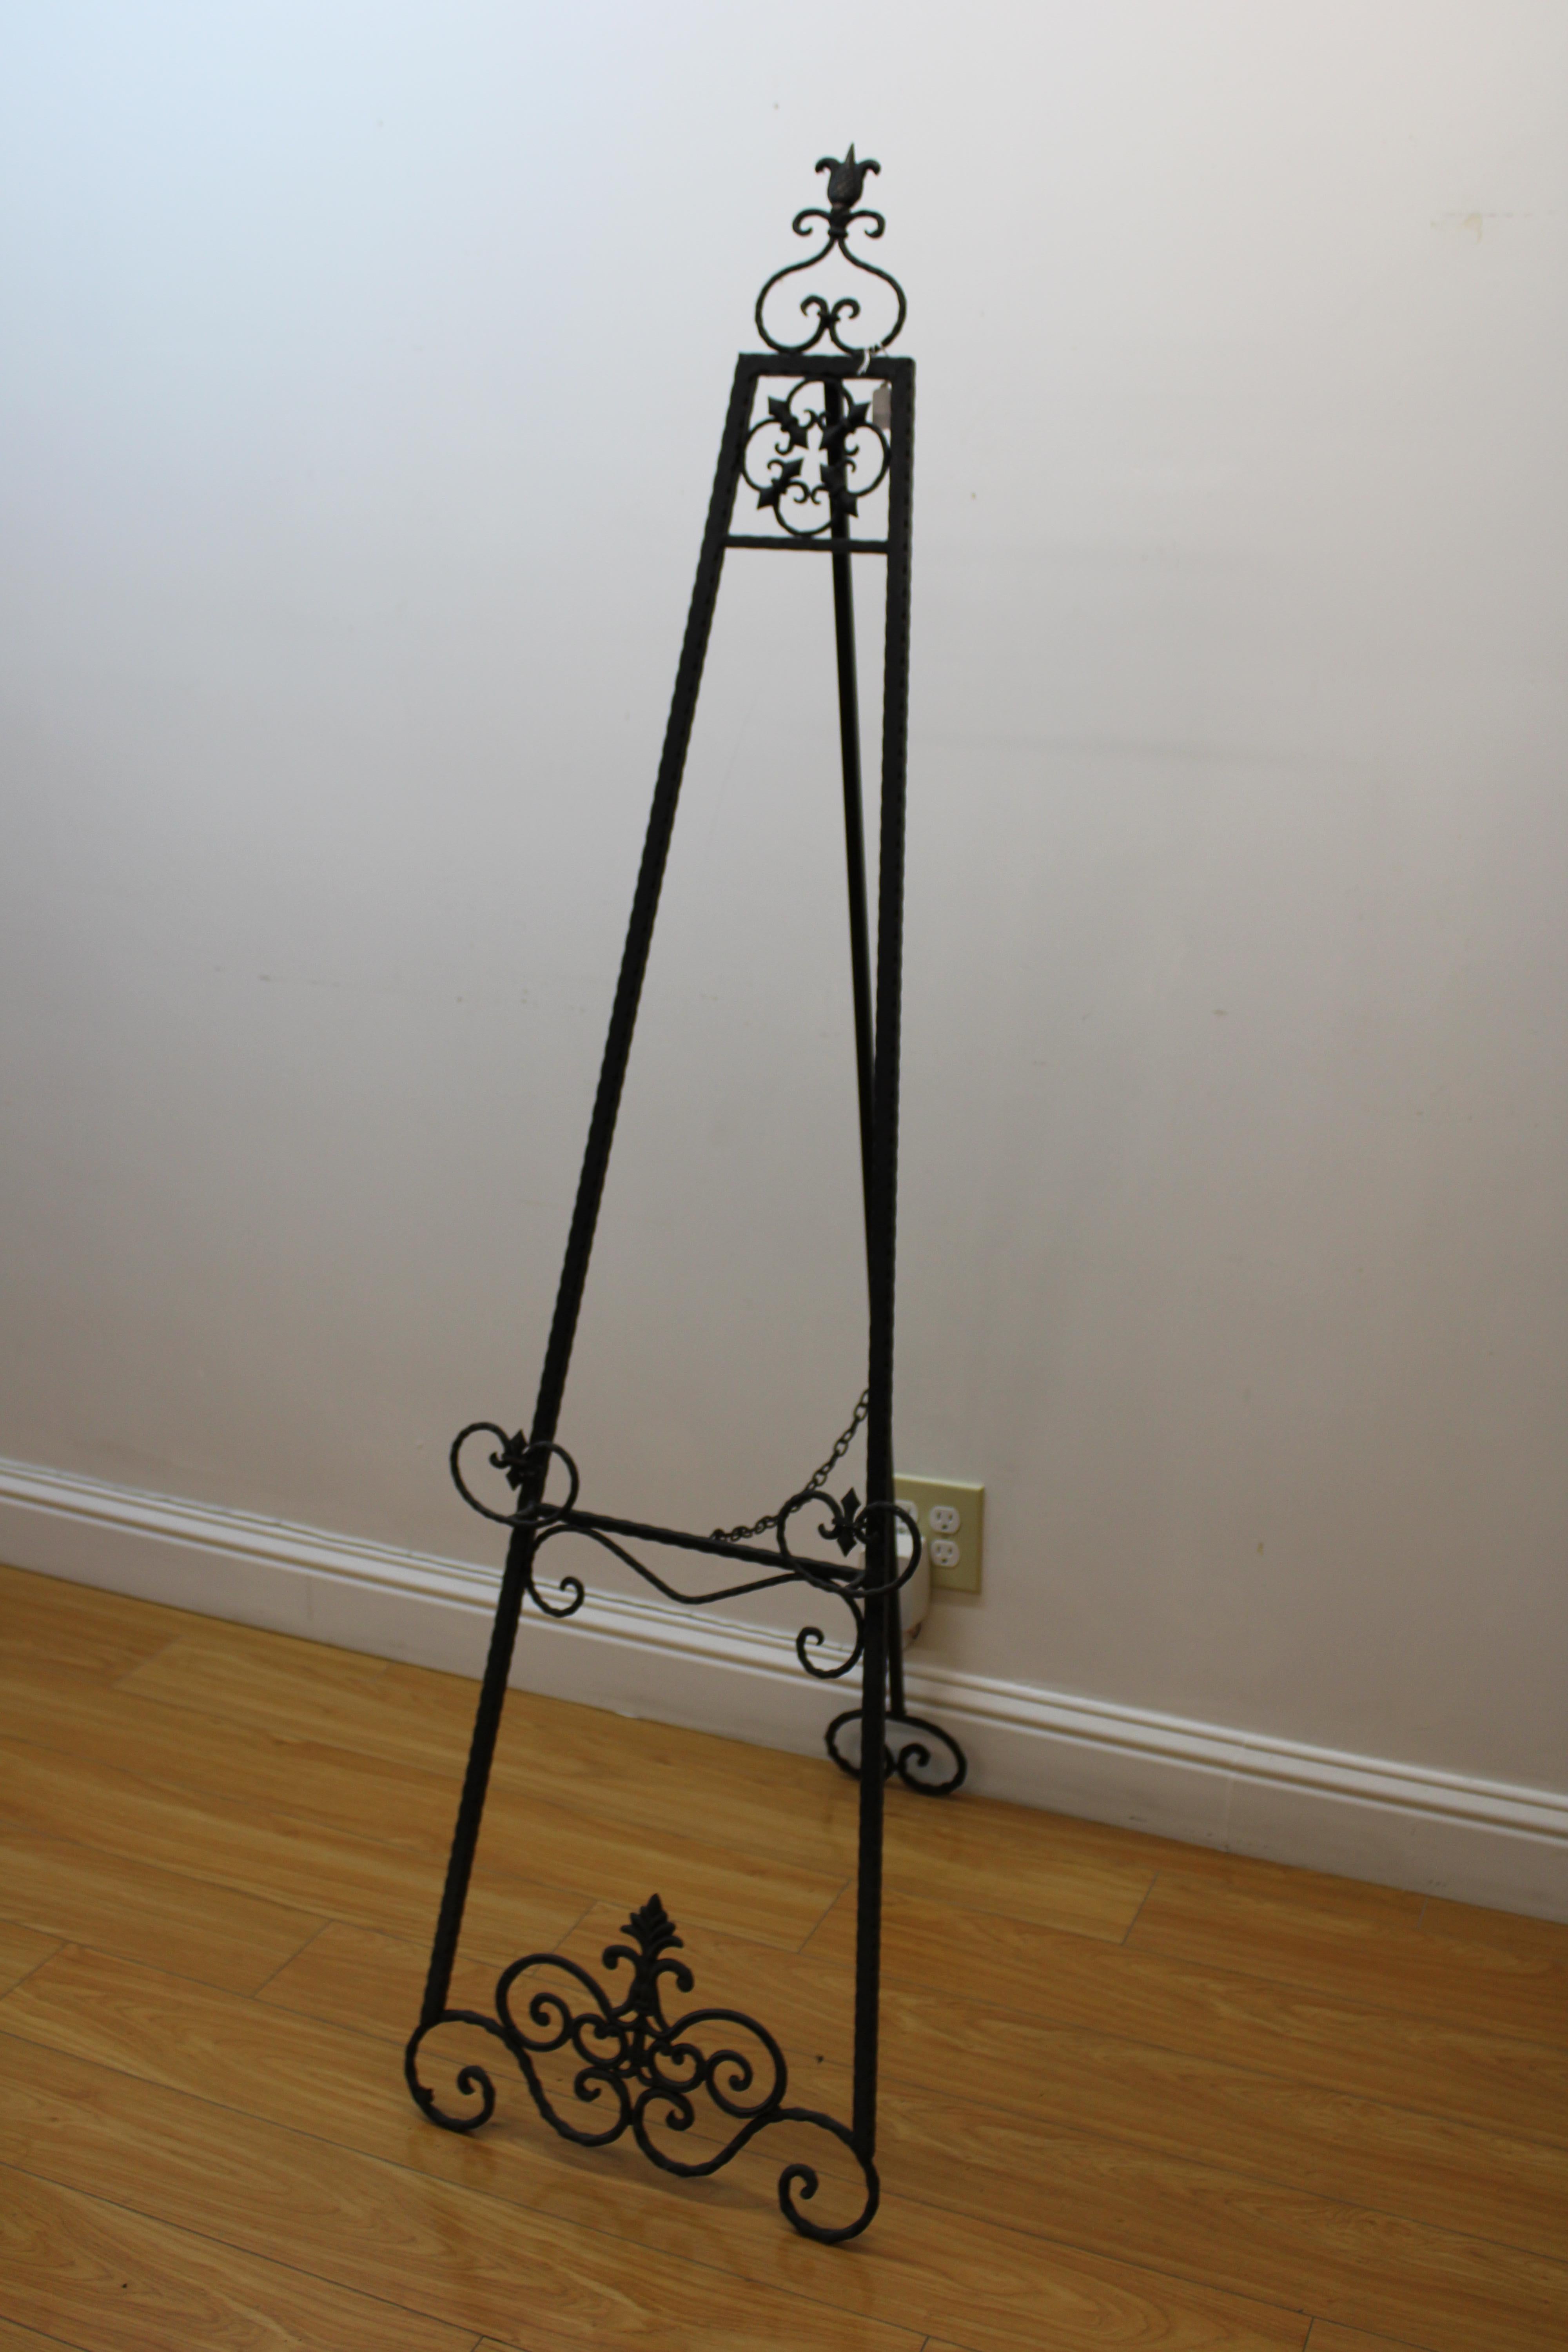 C. 20th century

Wrought iron easel.